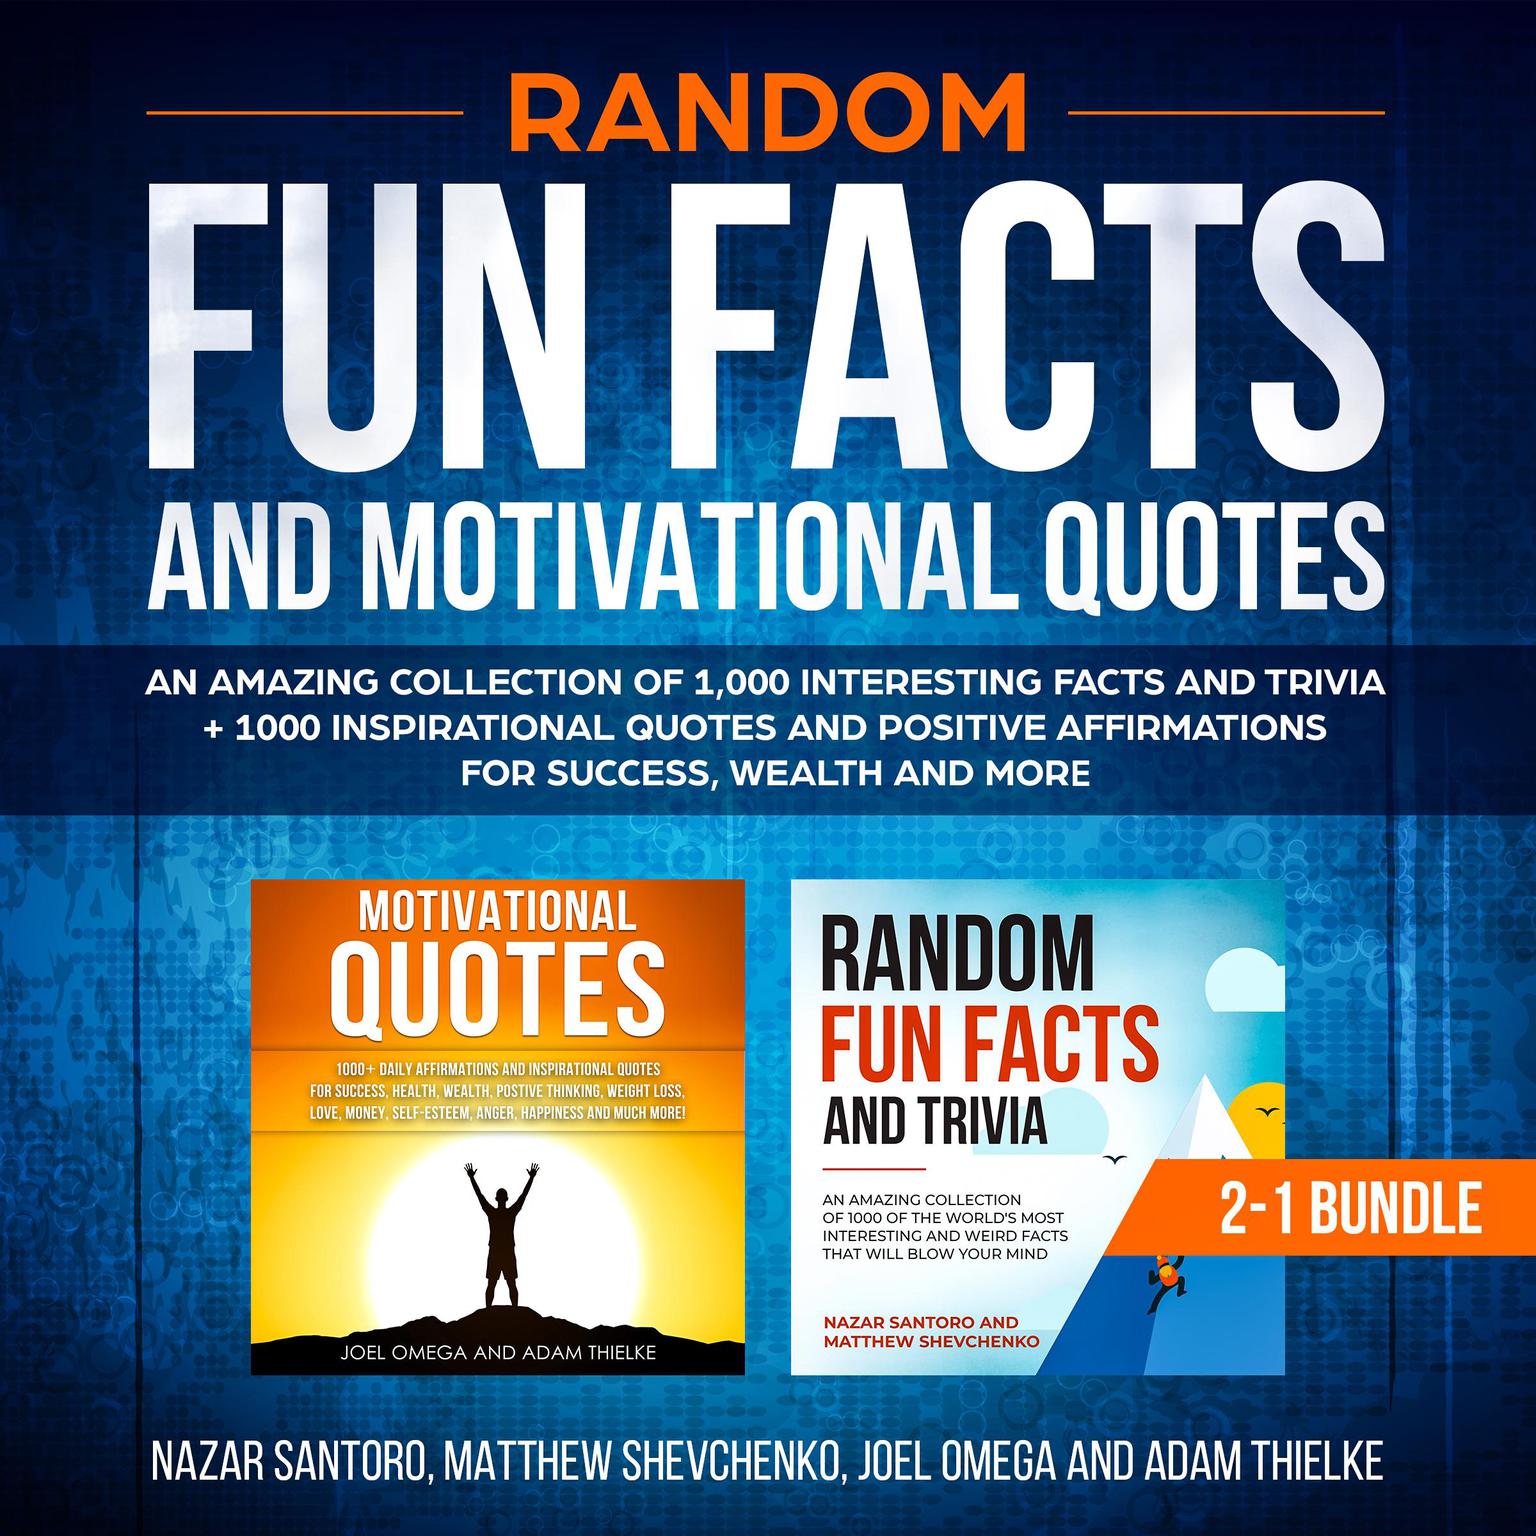 Random Fun Facts and Motivational Quotes (2-in-1) Bundle: An Amazing Collection of 1,000 Interesting Facts and Trivia + 1000 Inspirational Quotes and Positive Affirmations for Success, Wealth and More Audiobook, by Adam Thielke